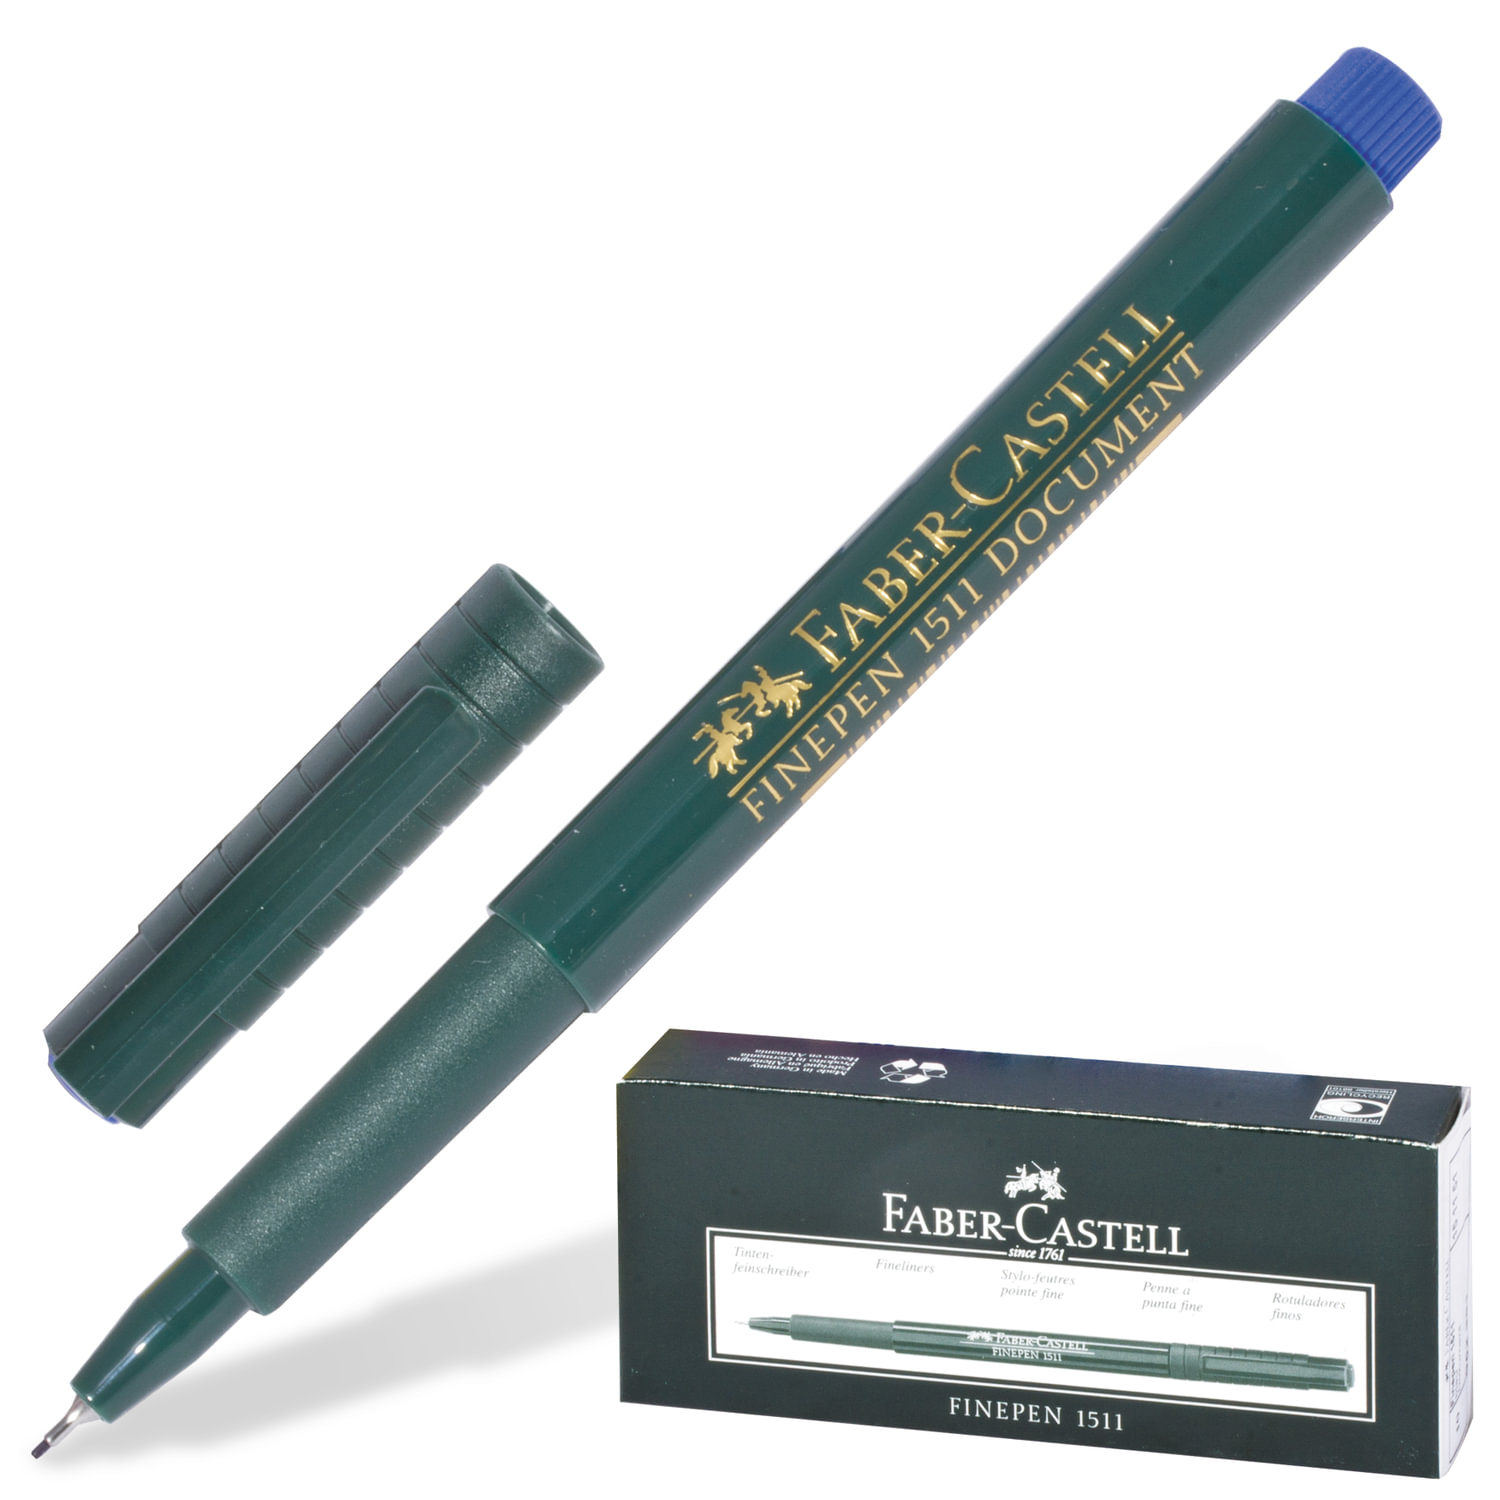 Faber-castell  FABER-CASTELL 151151,  10 .